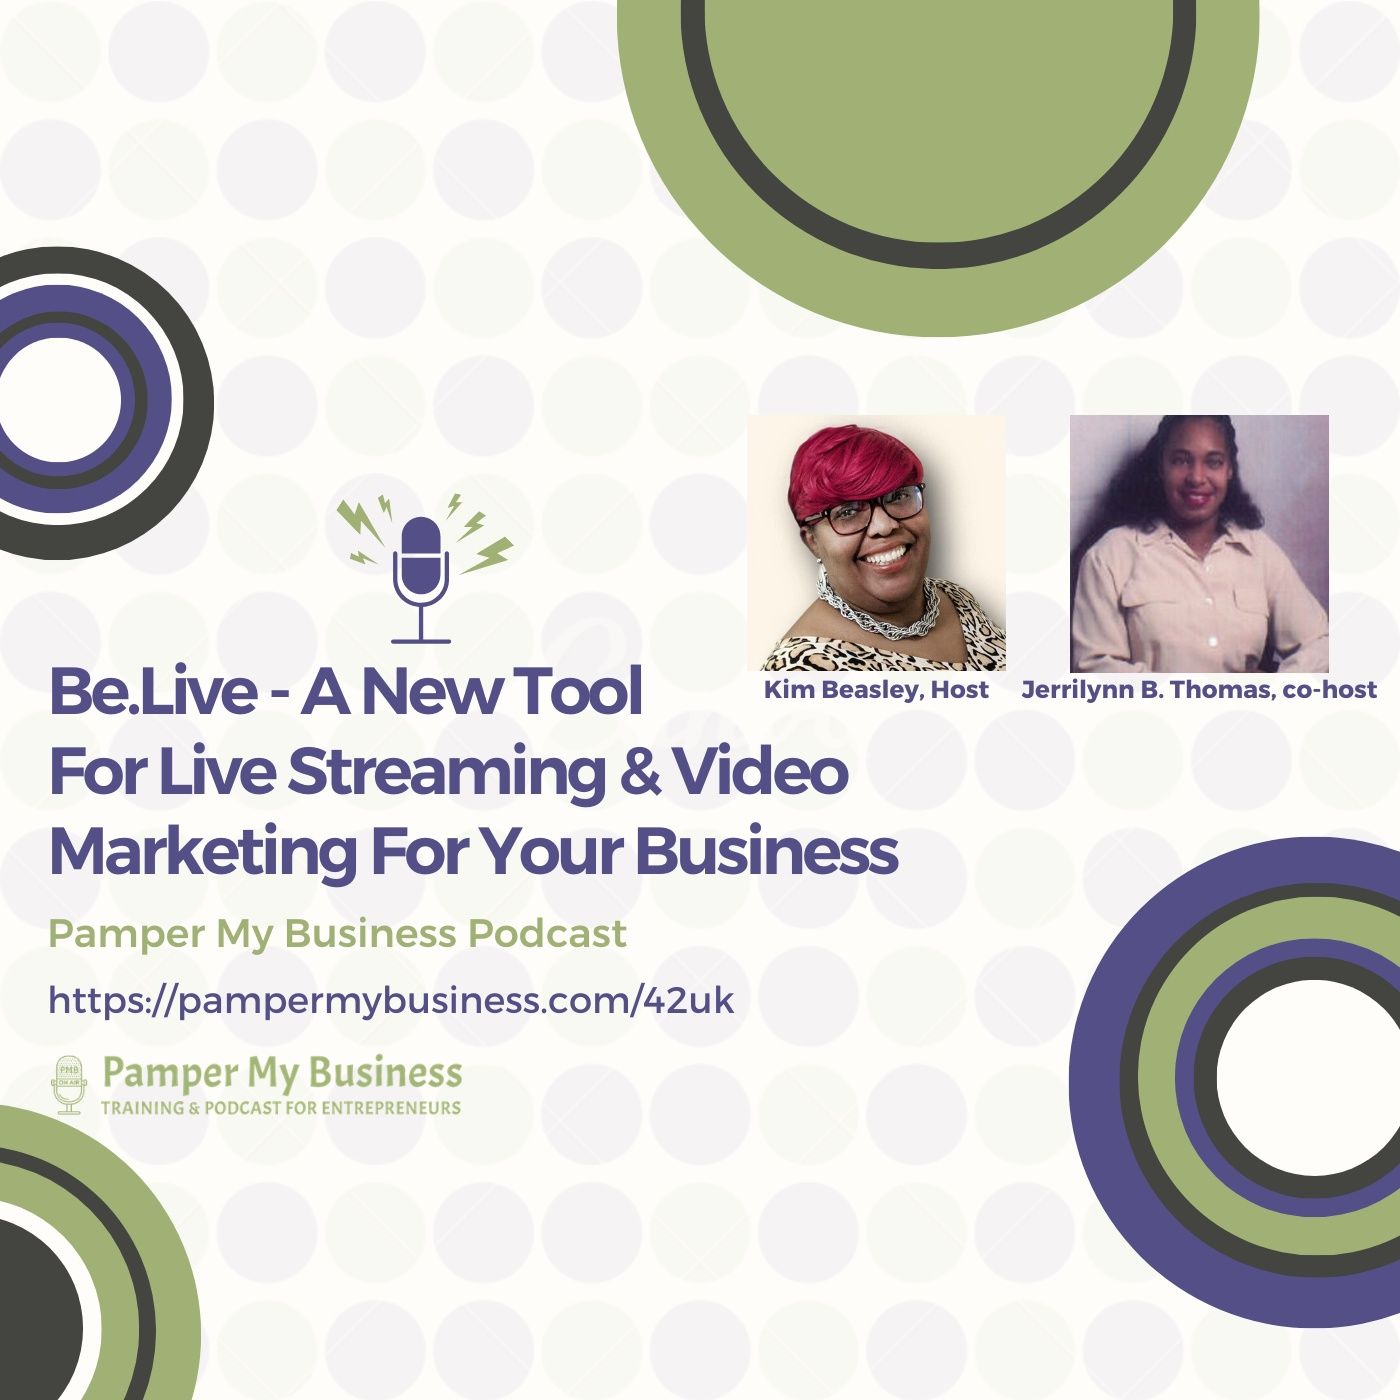 Be.Live - A New Tool For Live Streaming & Video Marketing For Your Business